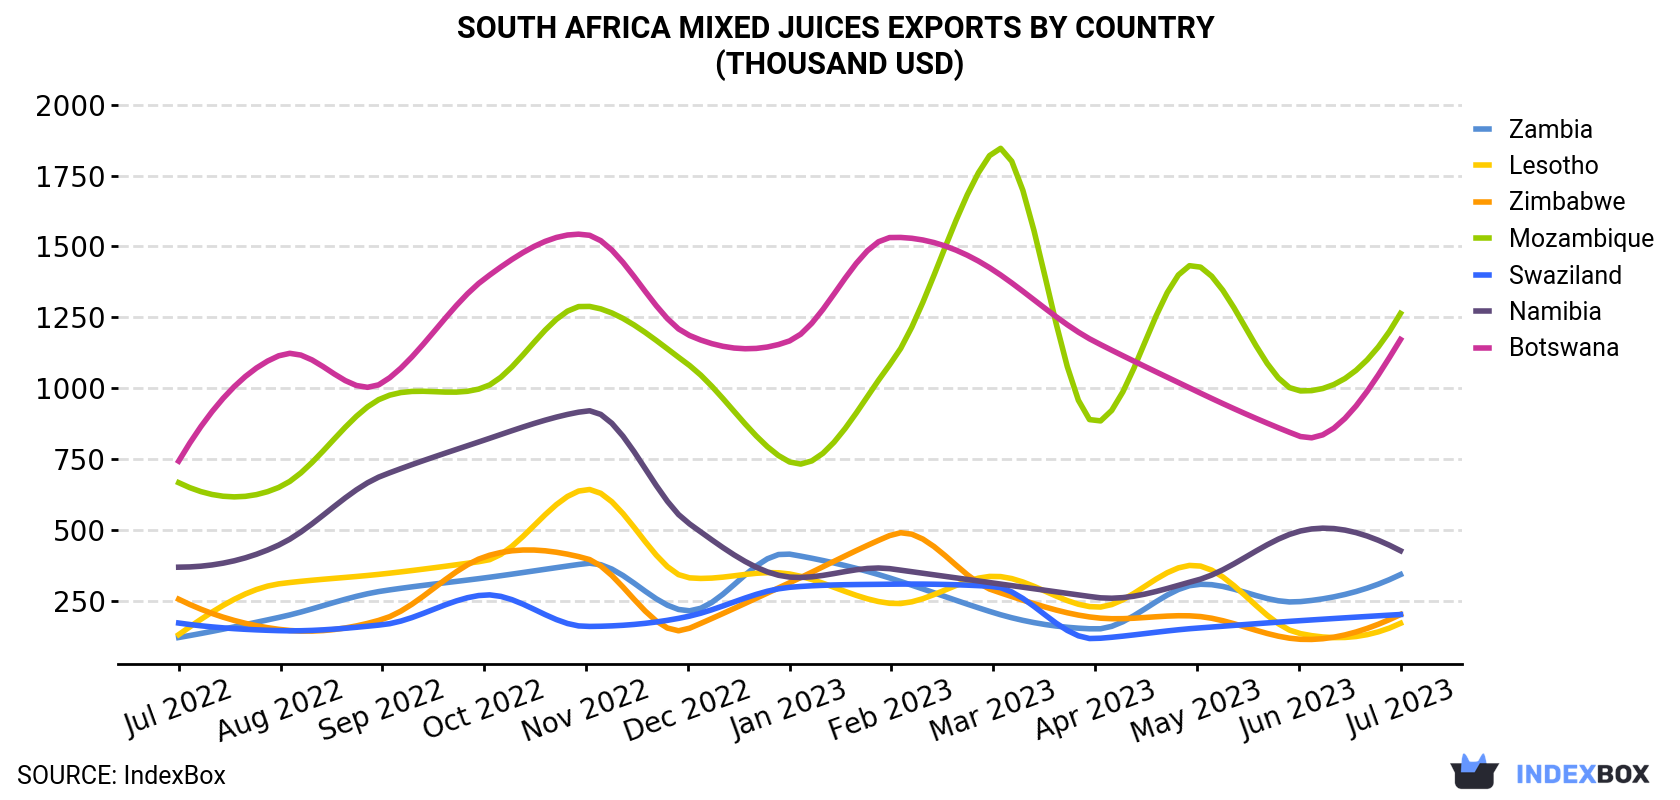 South Africa Mixed Juices Exports By Country (Thousand USD)